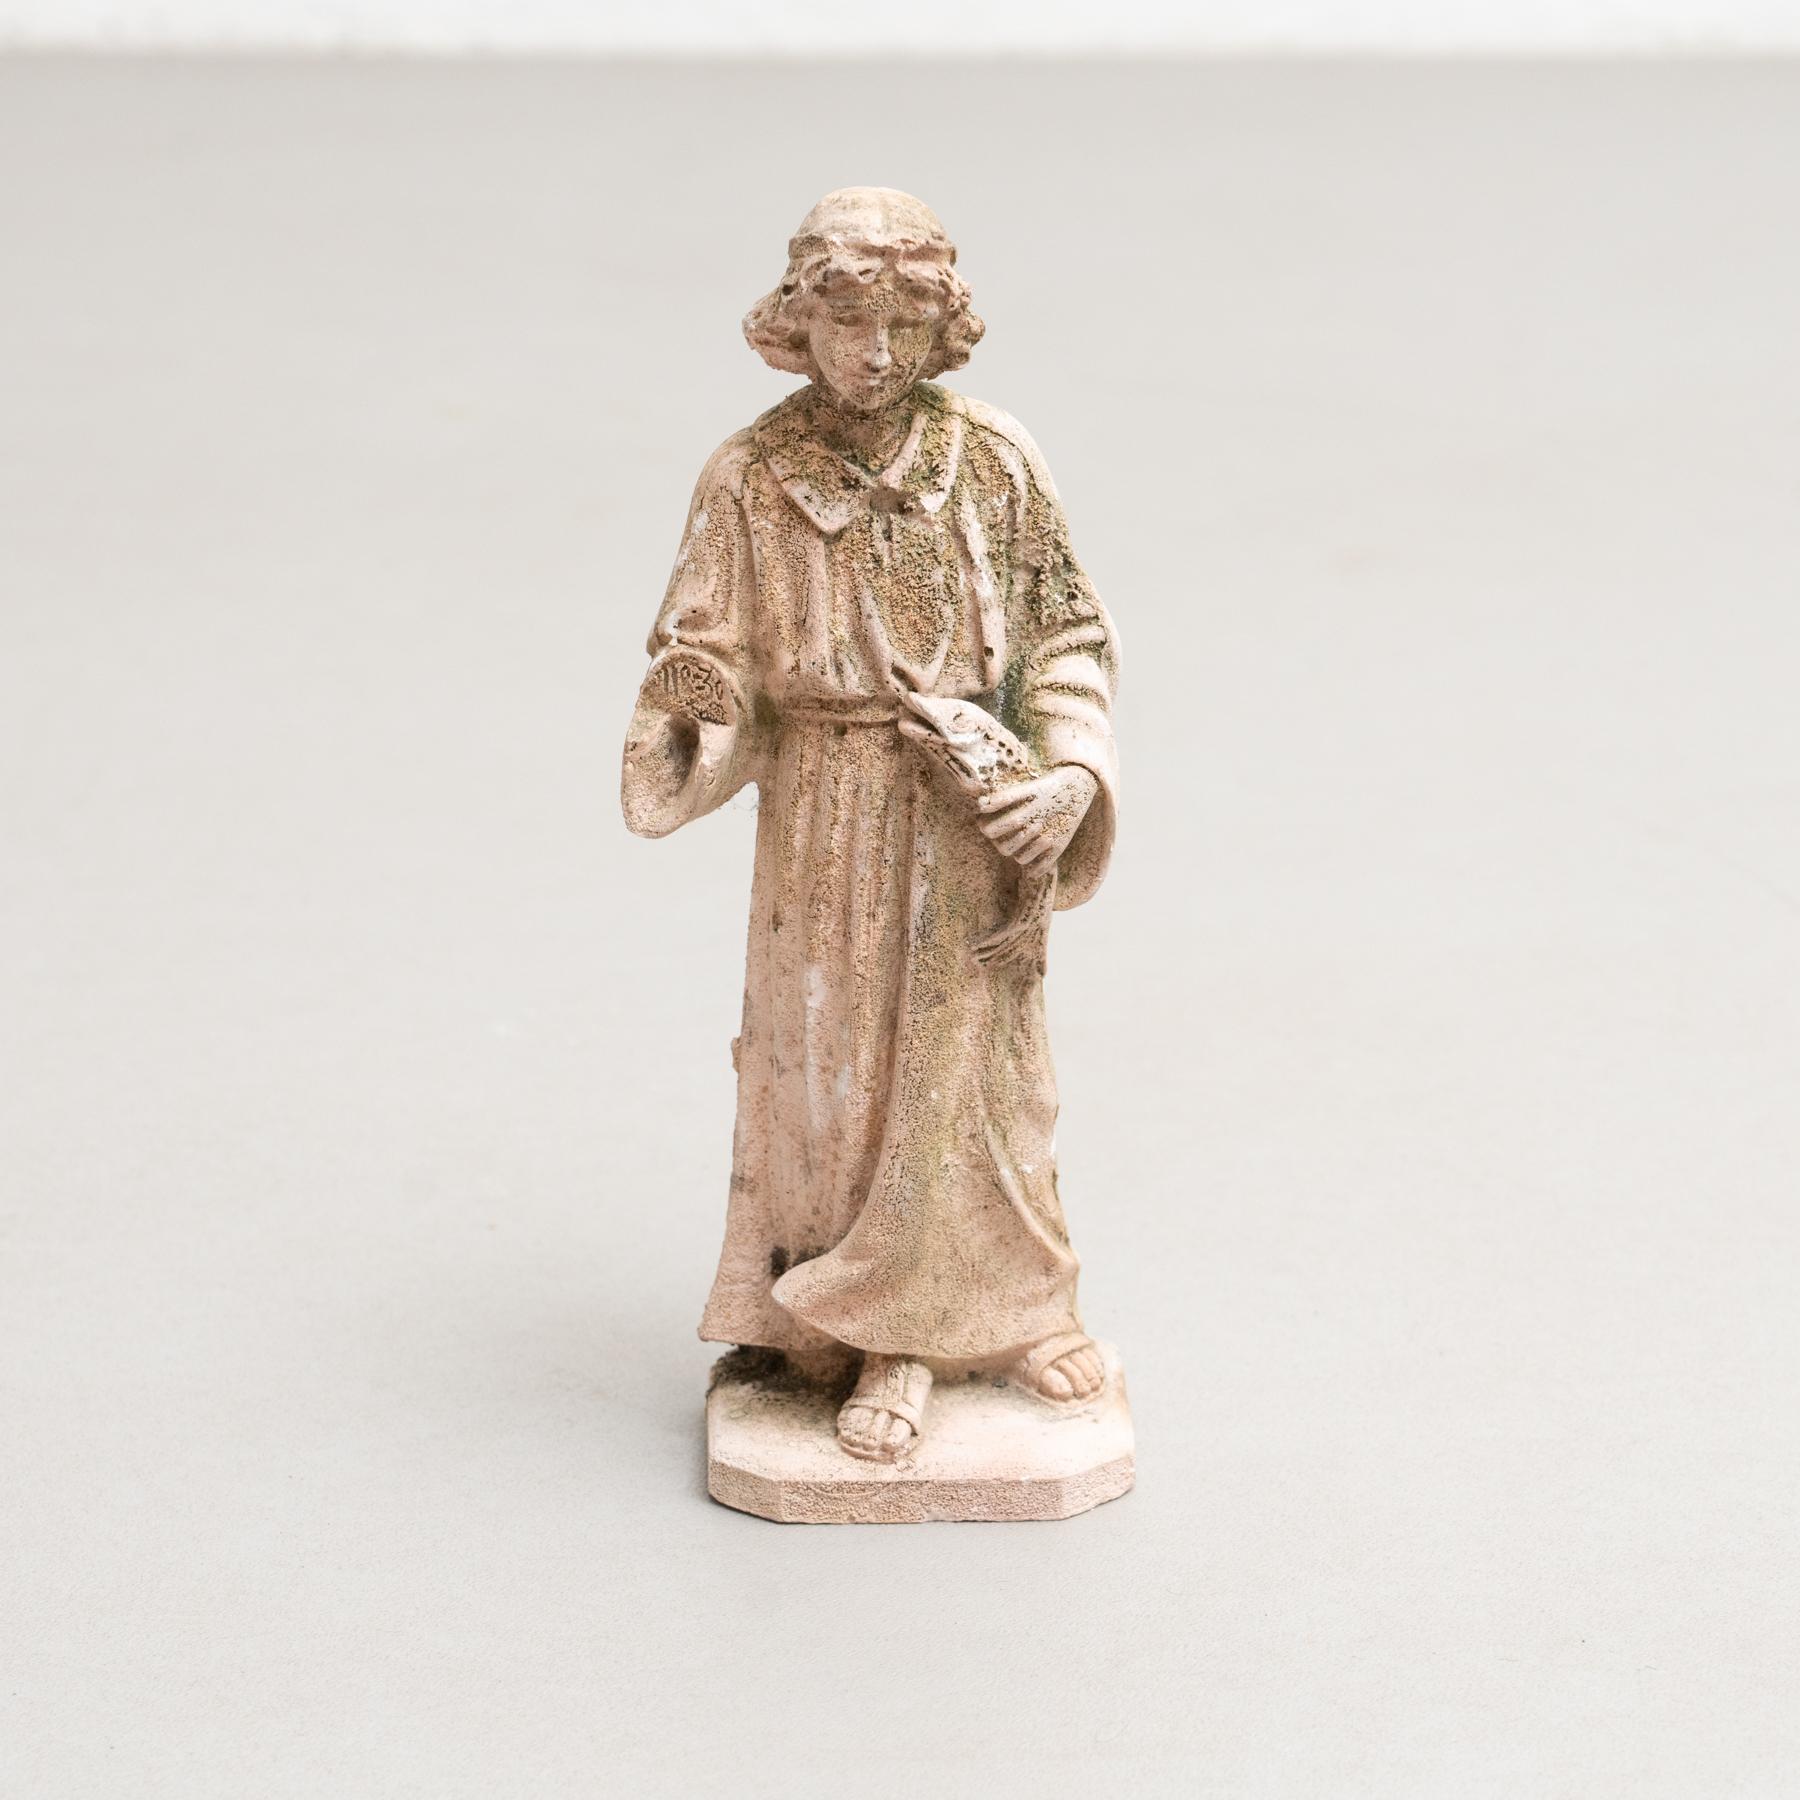 Traditional religious plaster figure of a young Jesus with a fish.

Made in traditional Catalan atelier in Olot, Spain, circa 1950.

In original condition, with minor wear consistent with age and use, preserving a beautiful patina.

Olot has a